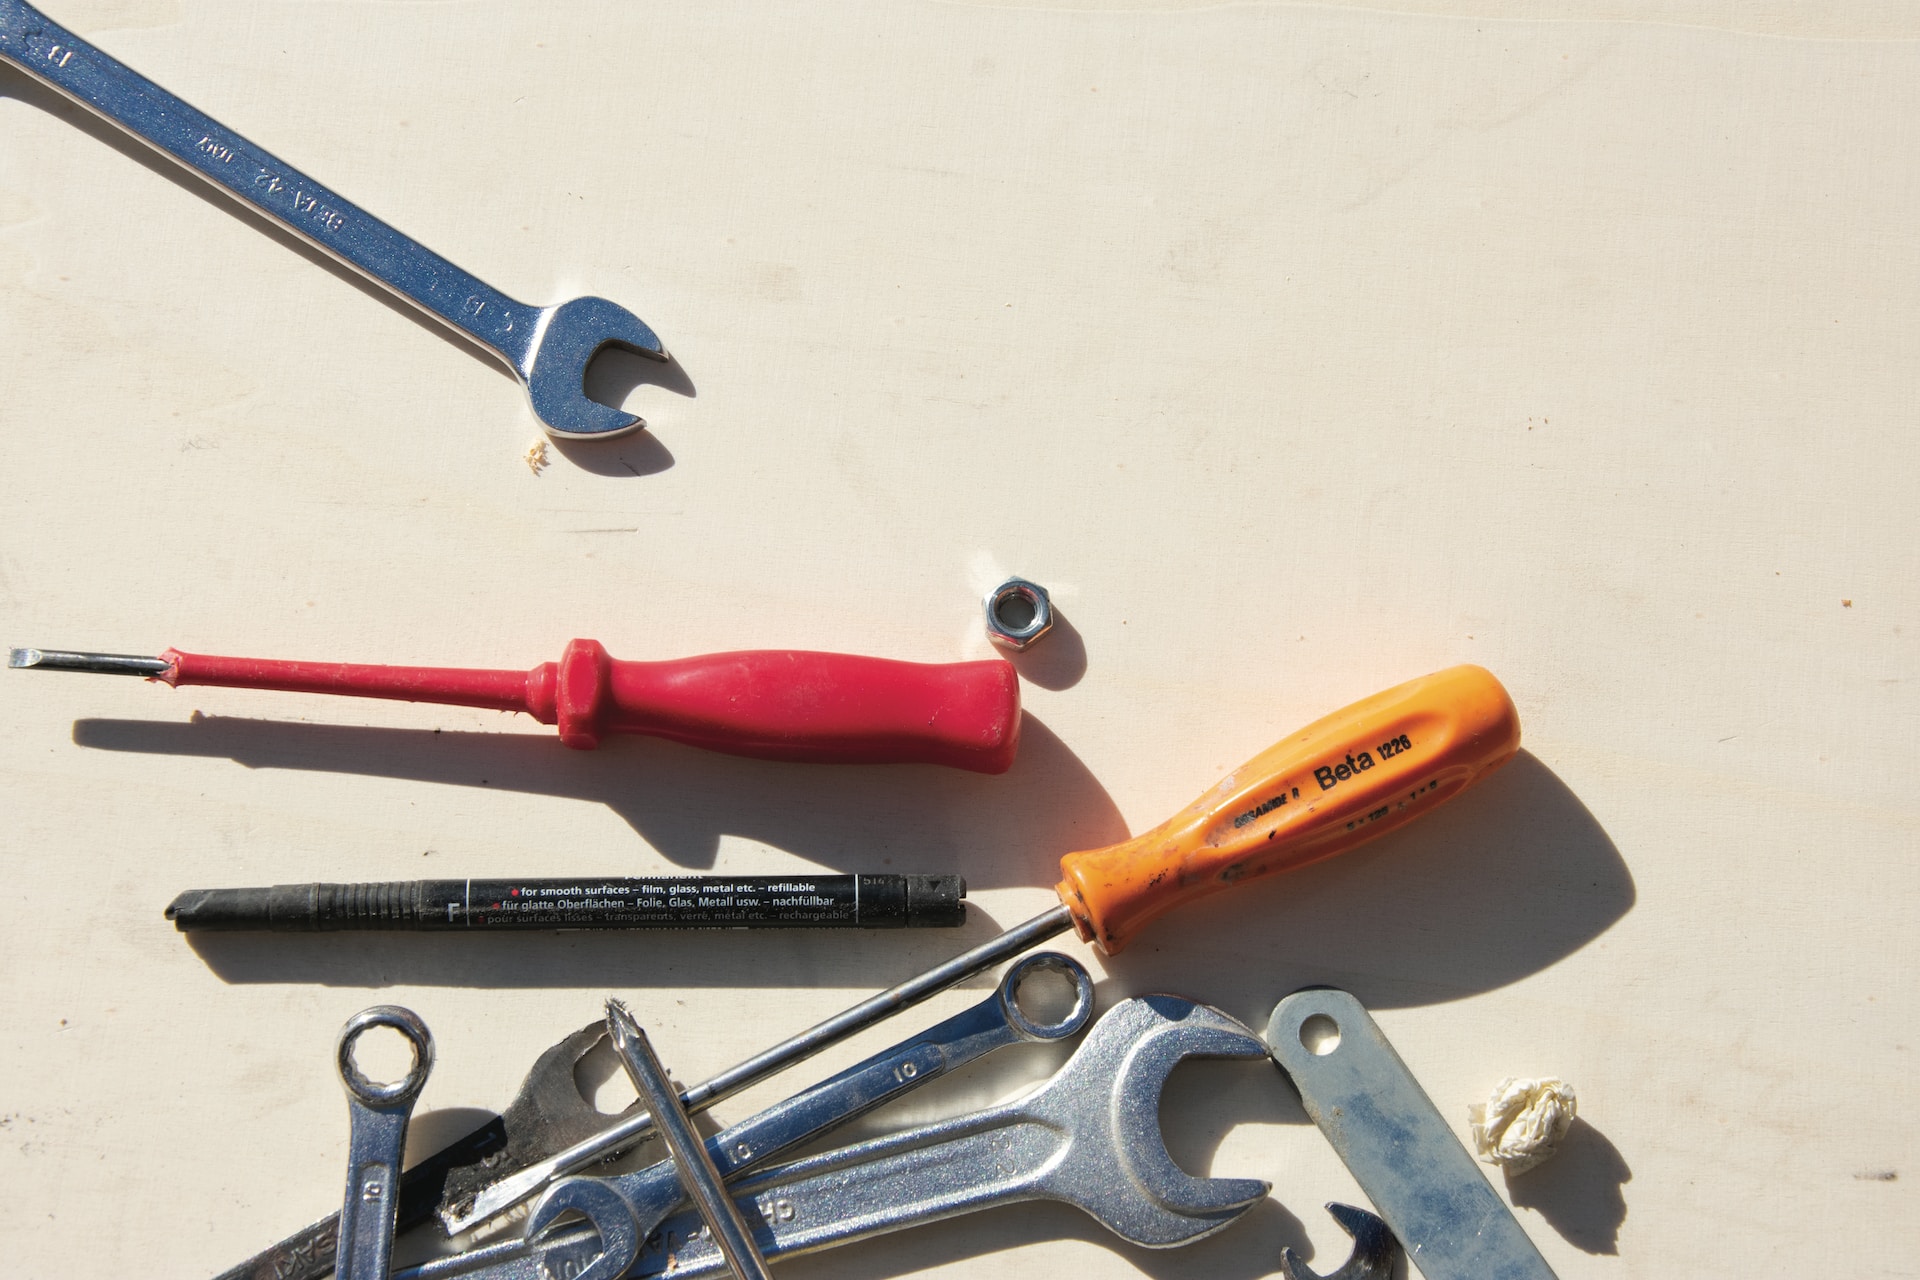 A selection of tools